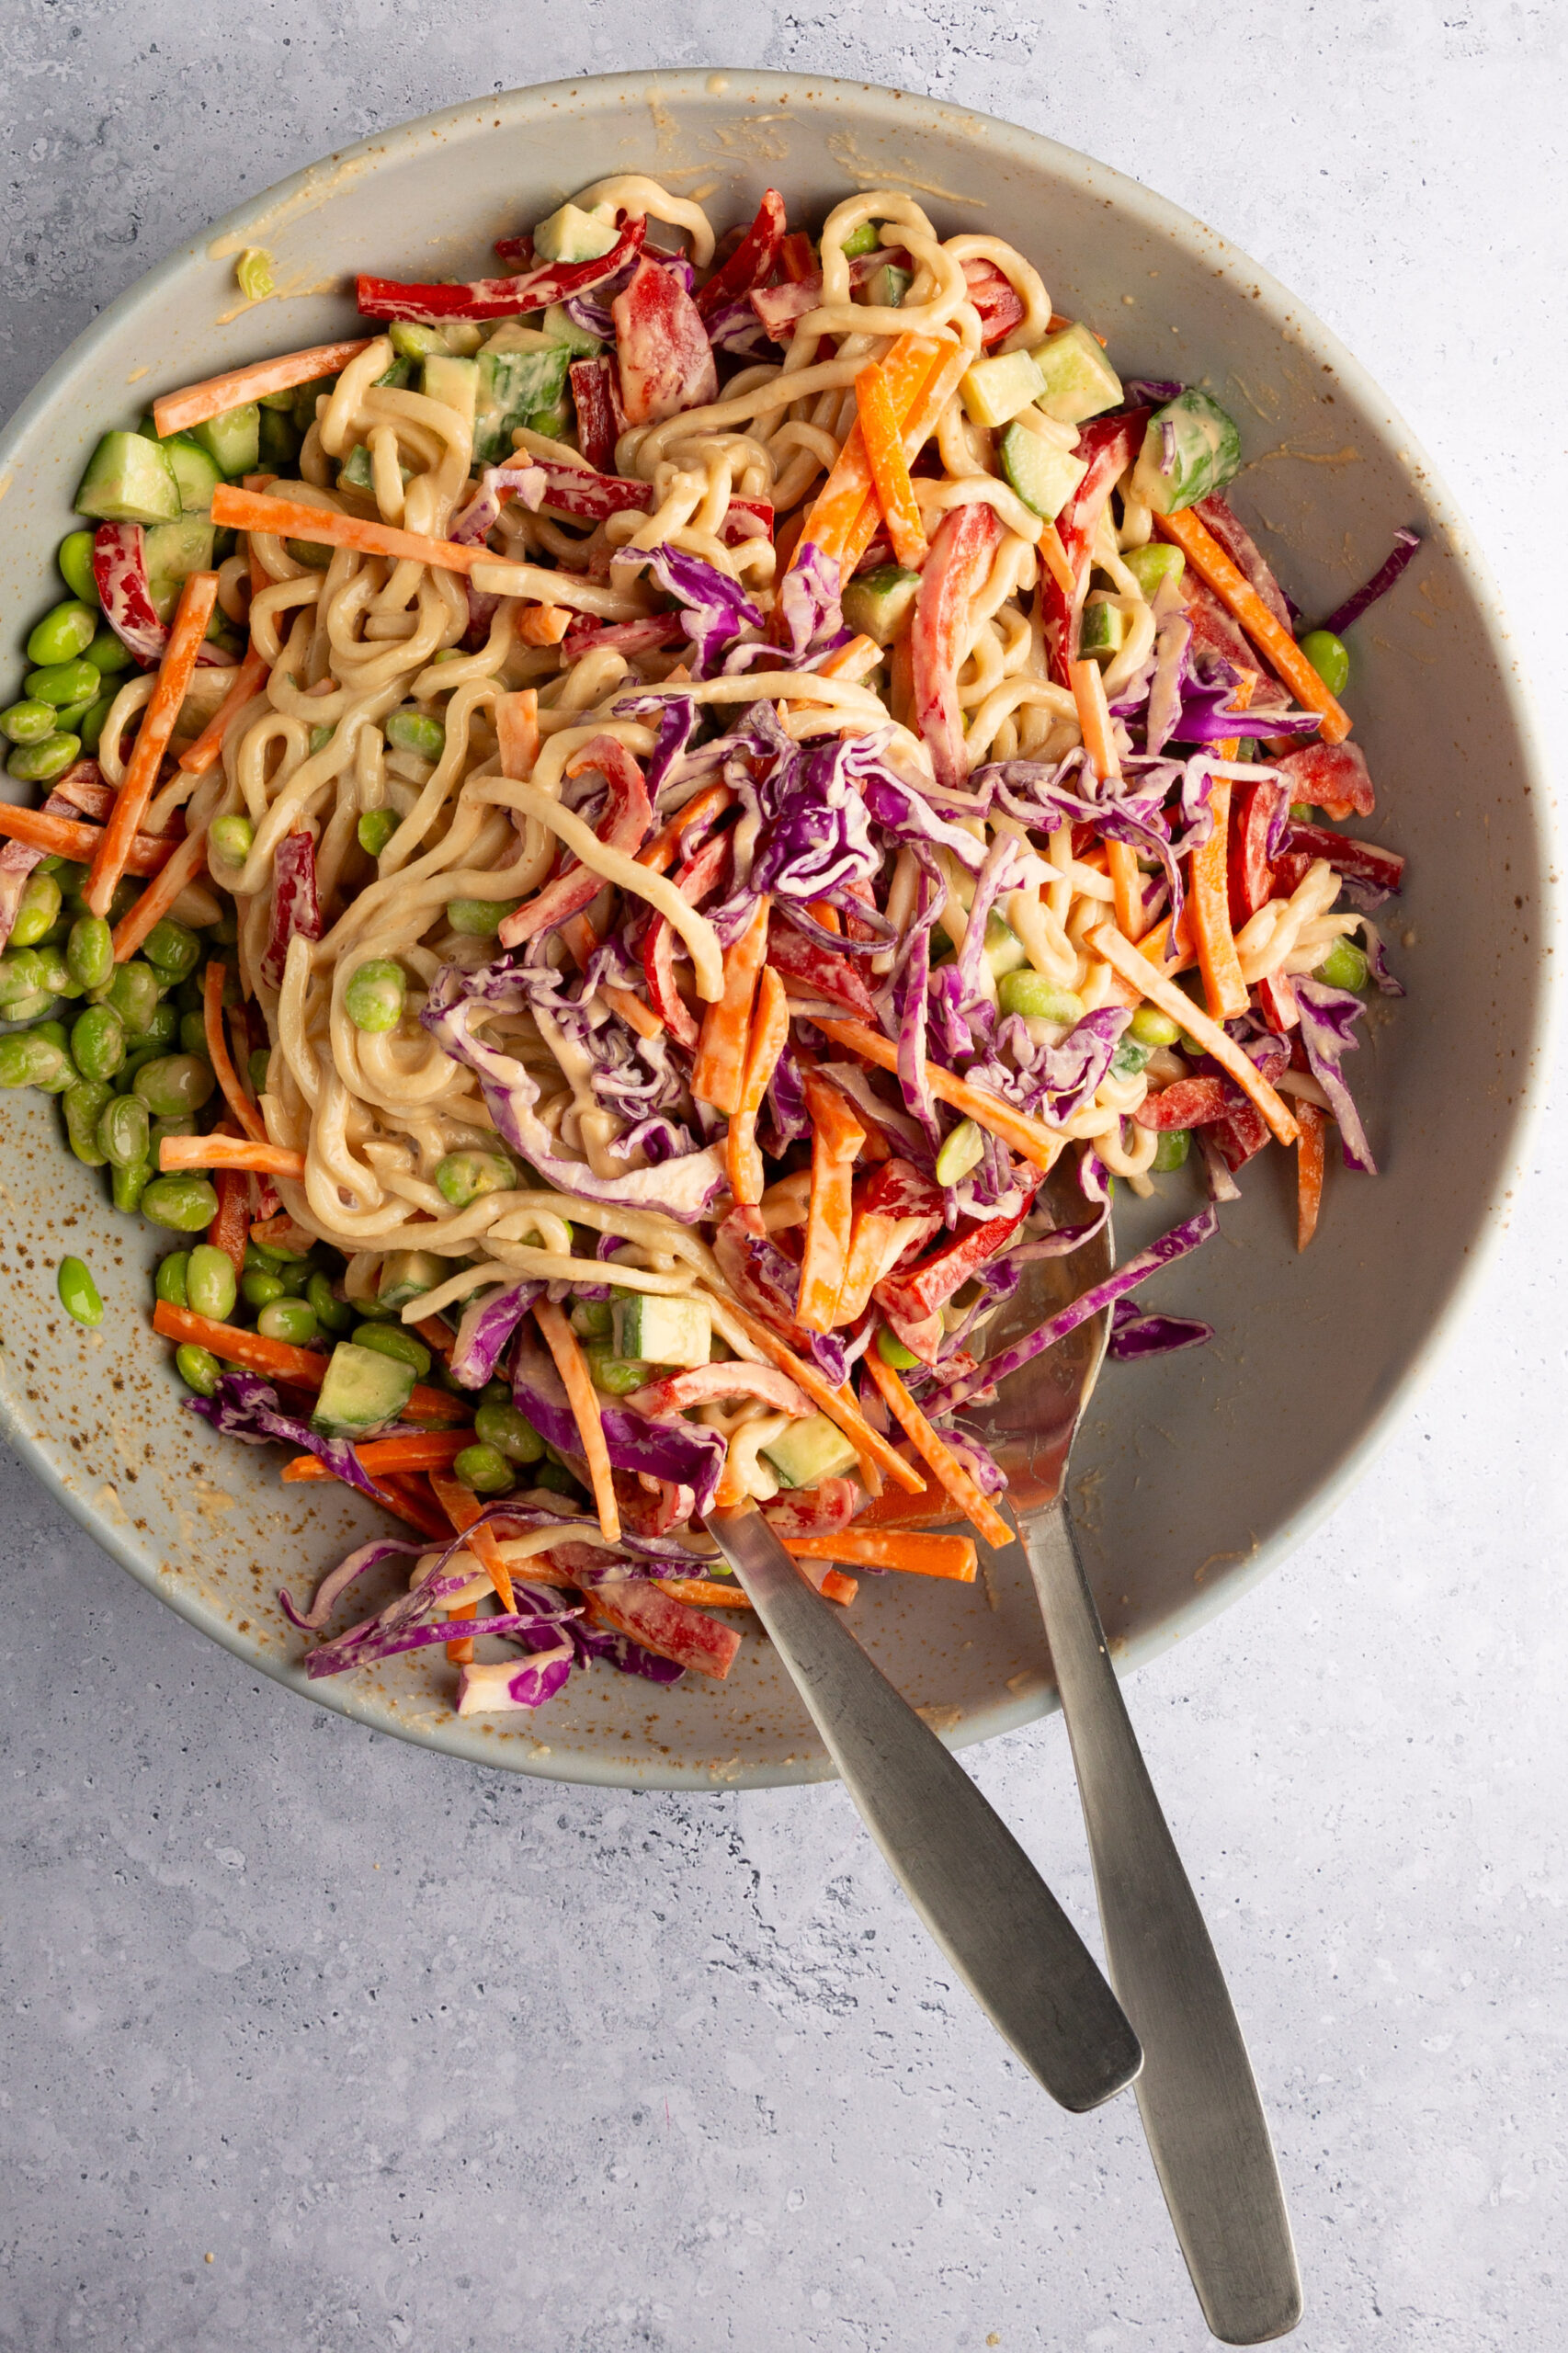 Vegan Asian Noodle Salad is just the ticket. With fresh, crunchy vegetables and a spicy cashew dressing